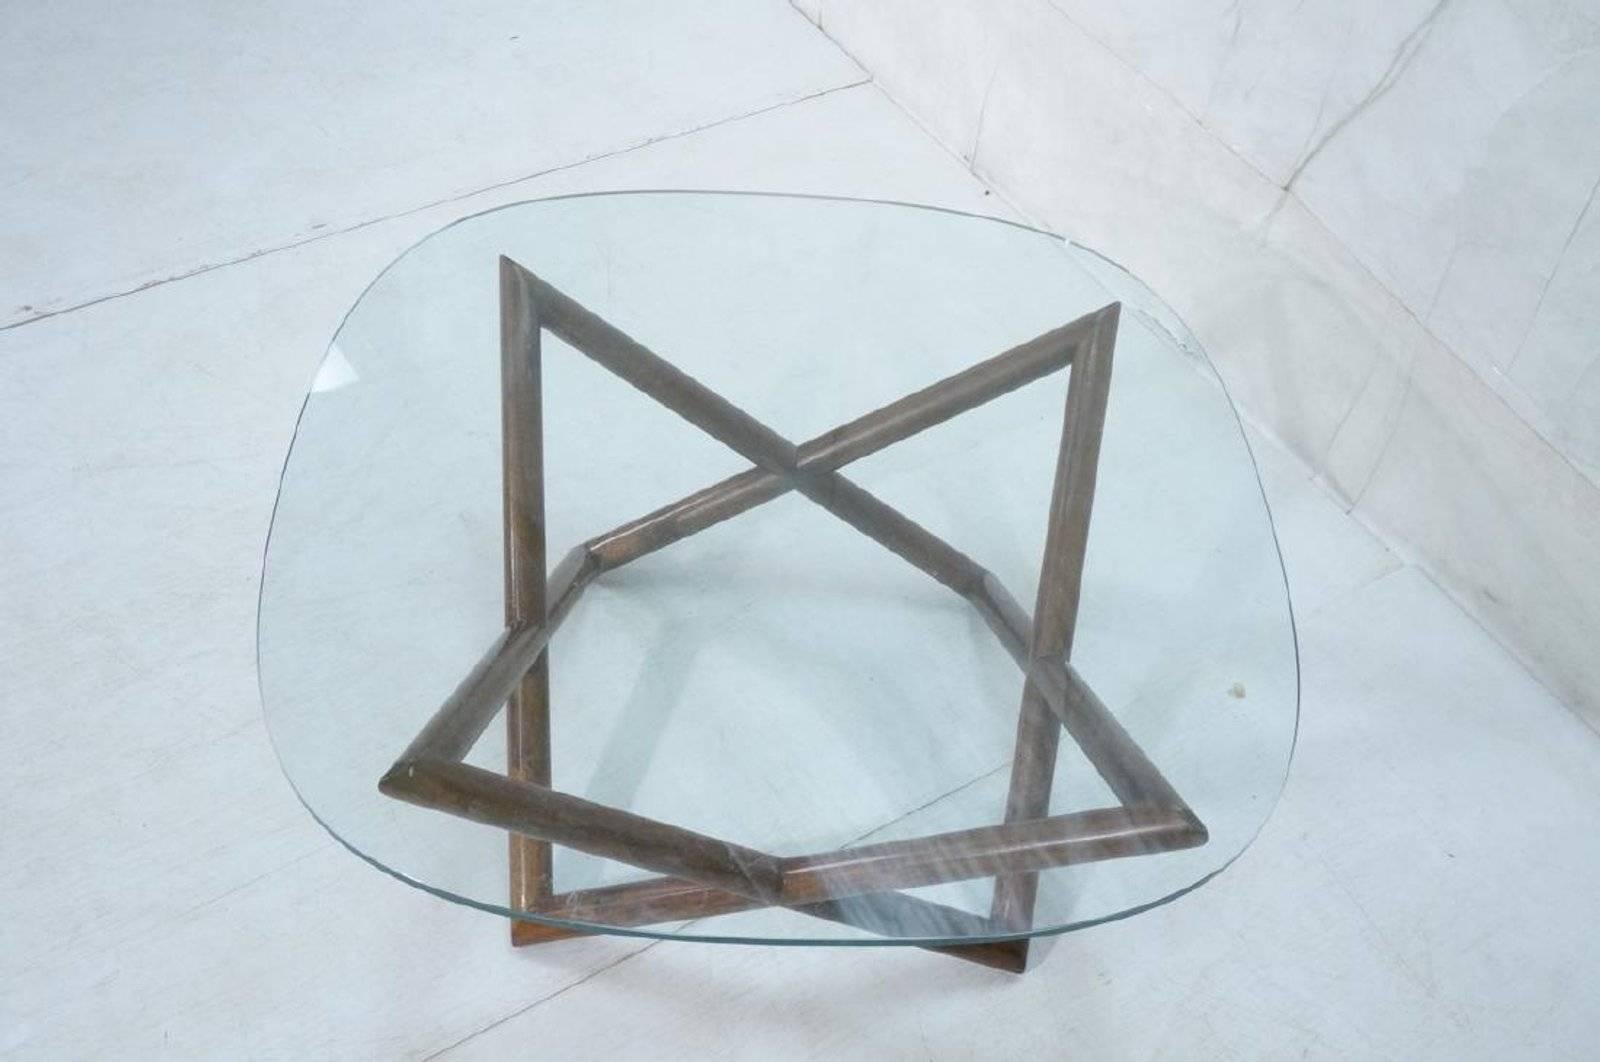 This modern walnut base cocktail / coffee table is a modern classic. The open pointed star base is solid walnut and comes with a simple rounded square glass top.

Dimensions: 16.25